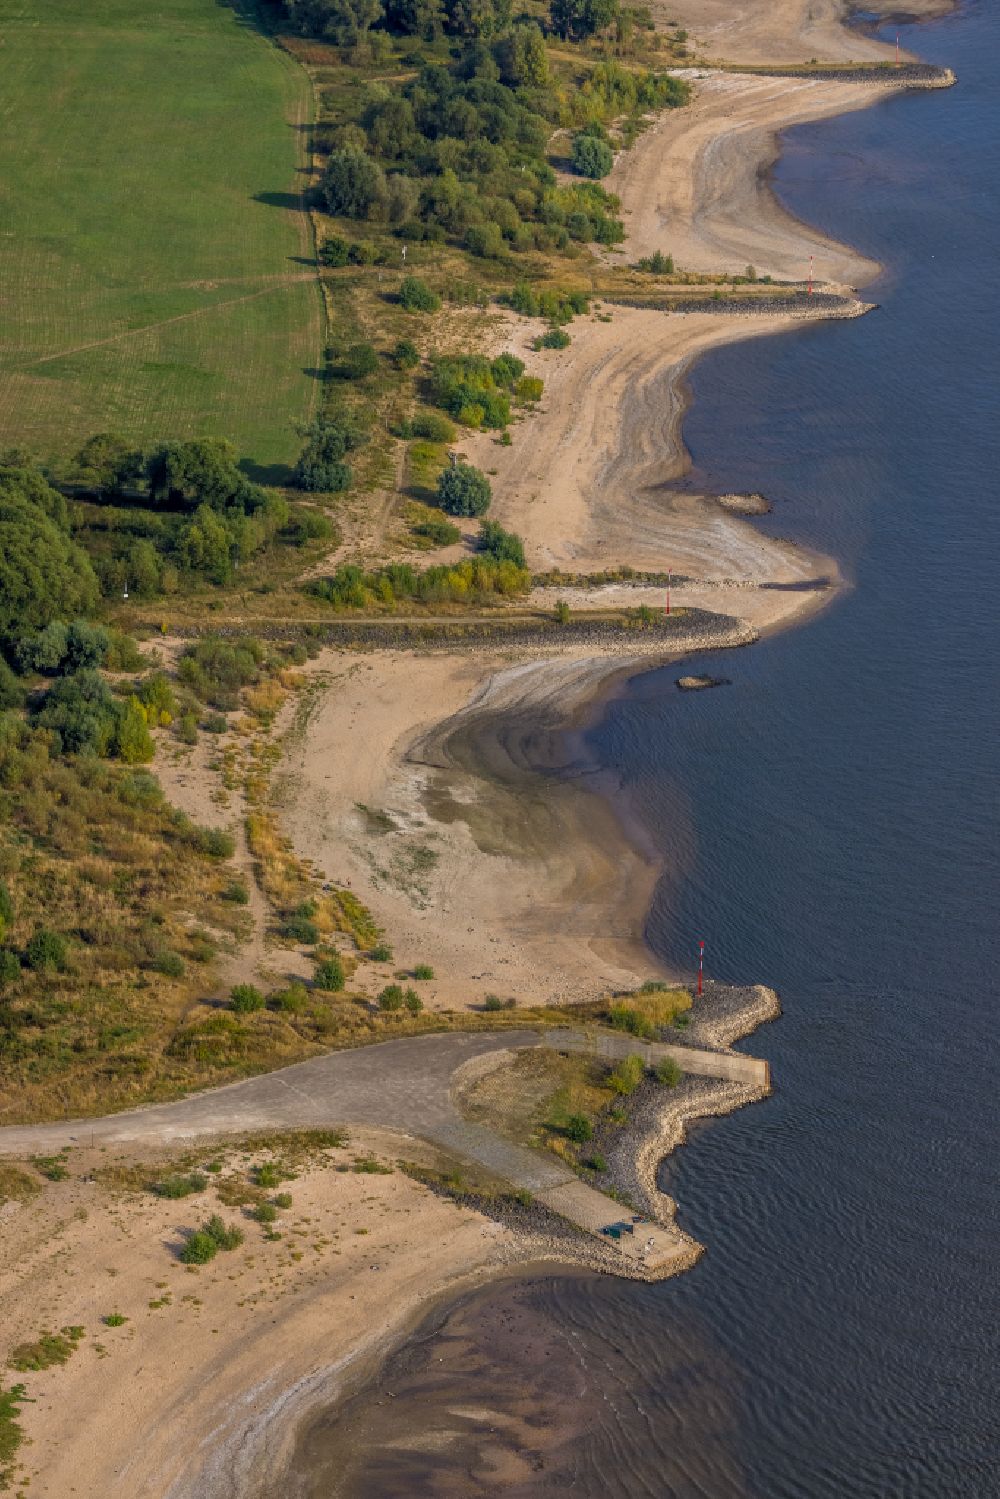 Aerial image Emmerich am Rhein - Sand accumulations and deposits on the dried-up groyne landscape of the low water level bank areas of the Rhine river in Emmerich am Rhein in the state North Rhine-Westphalia, Germany